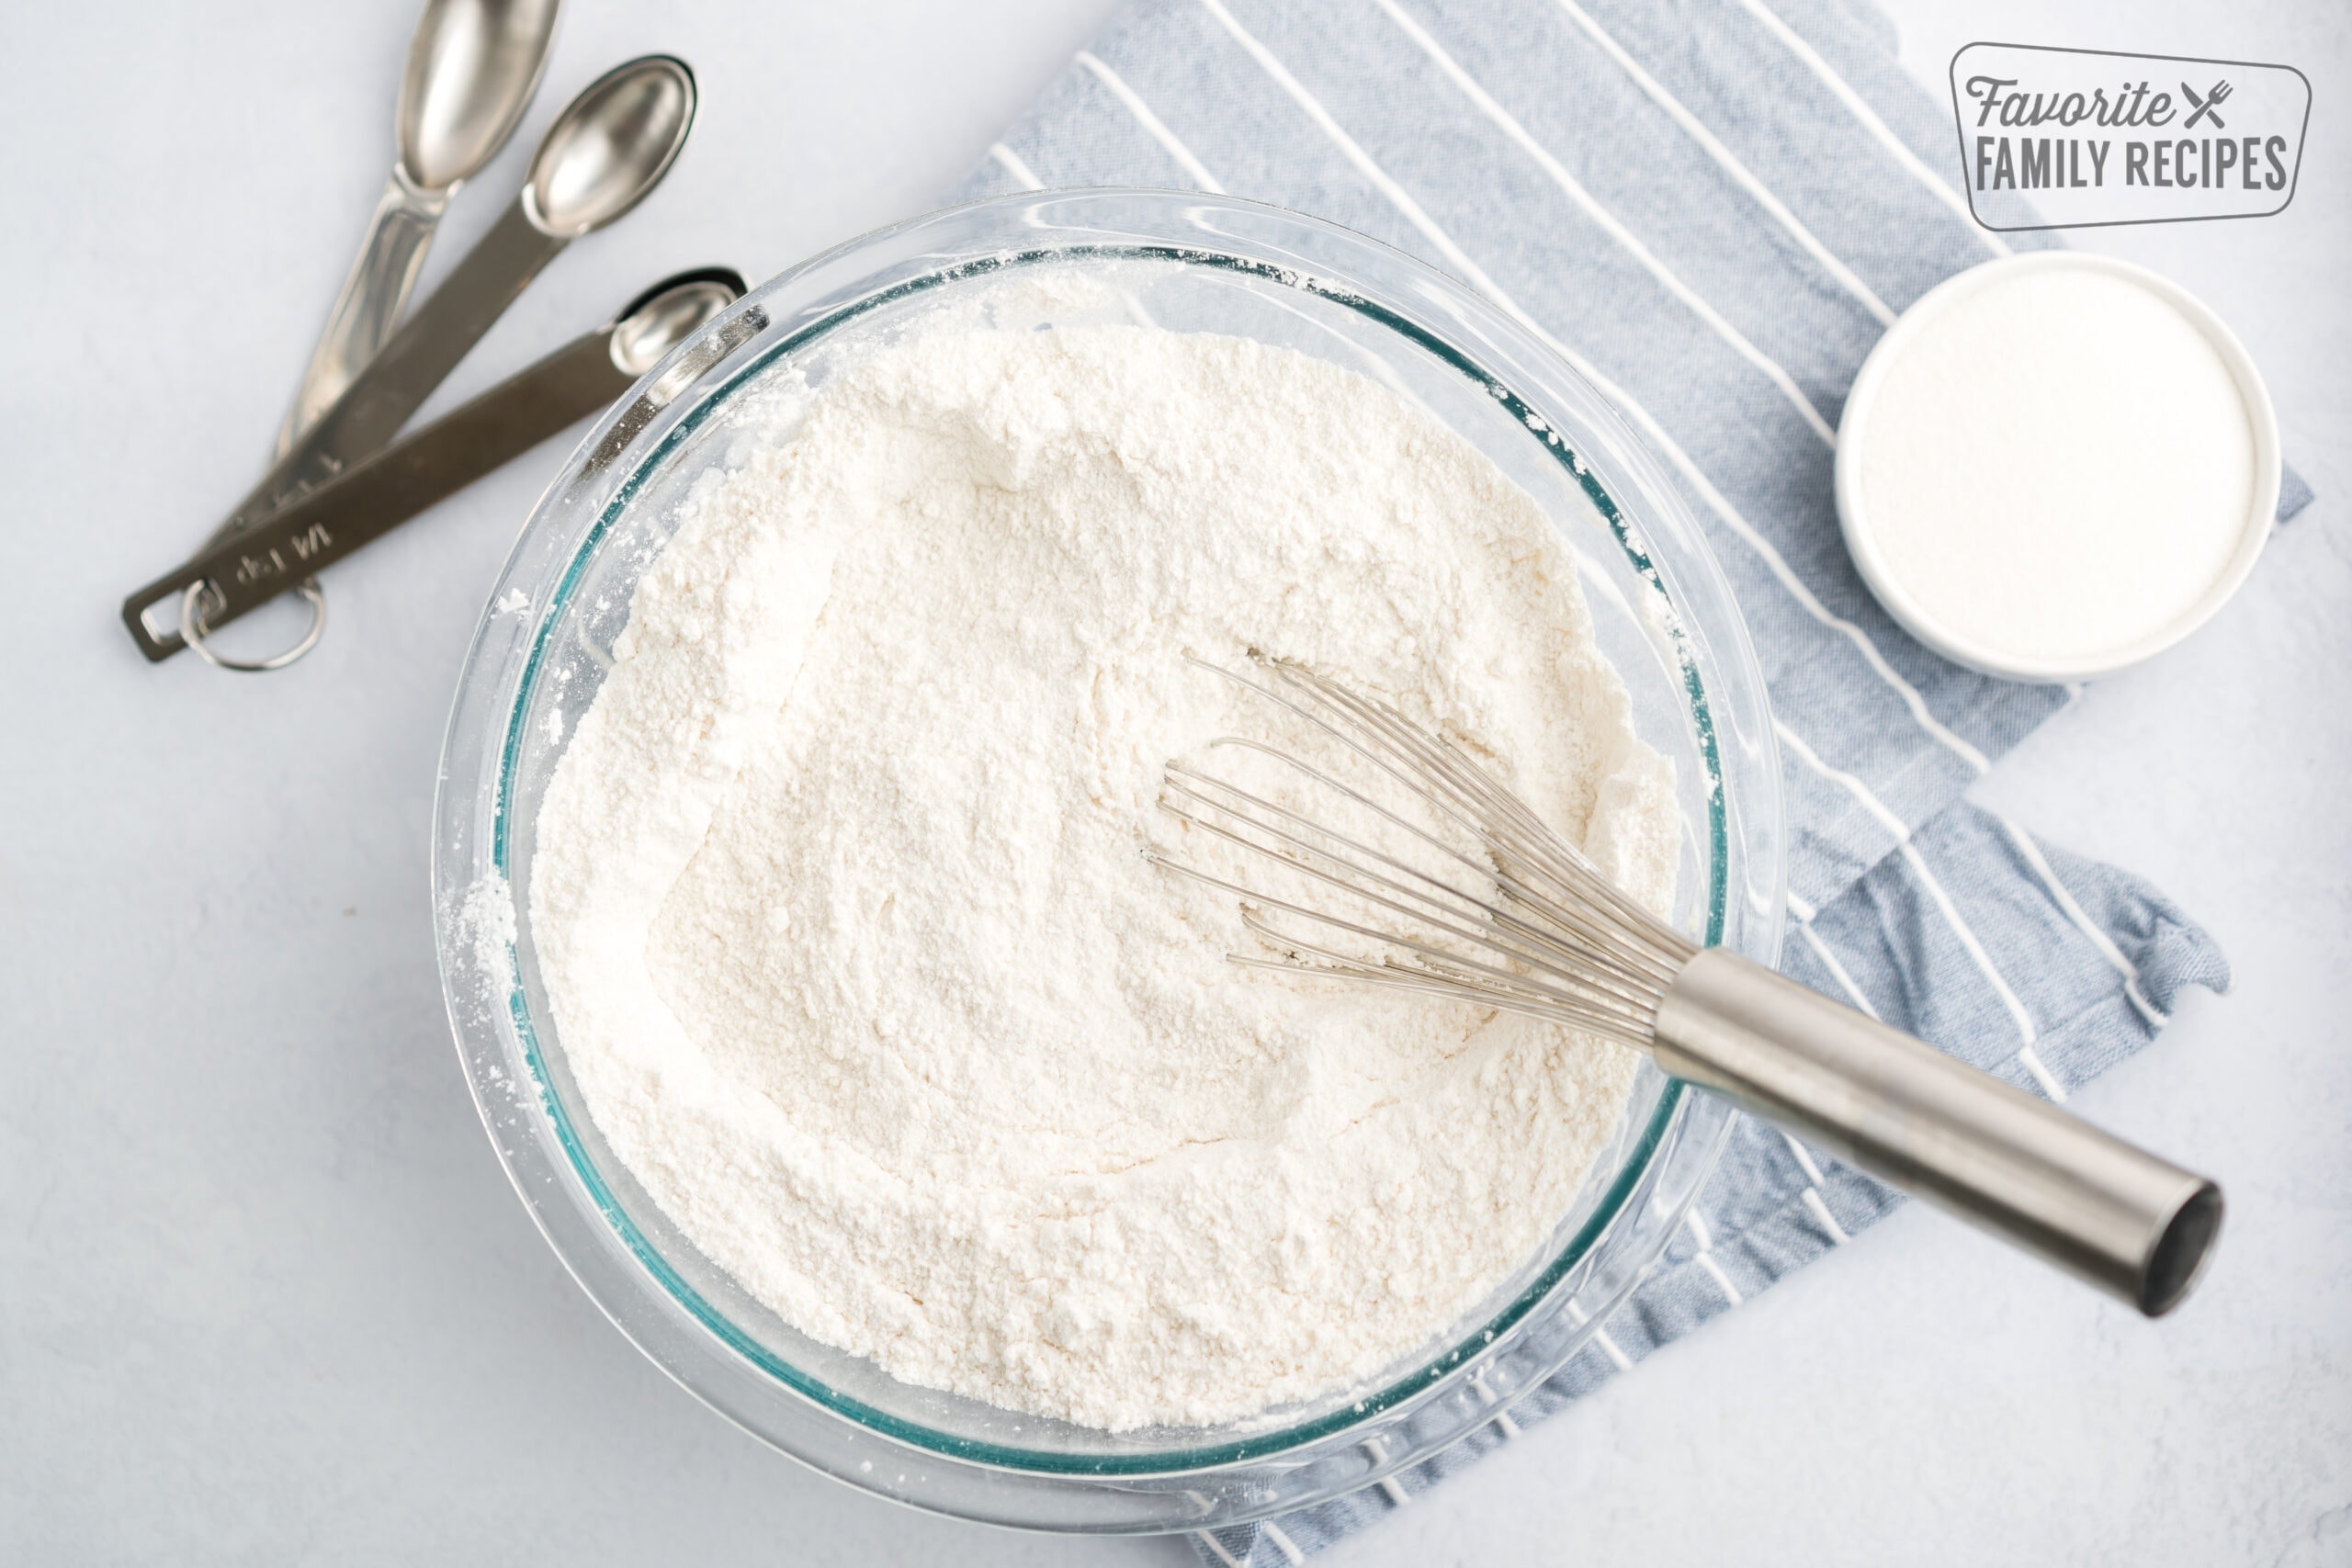 A mixing bowl of Homemade cake mix with a whisk inside